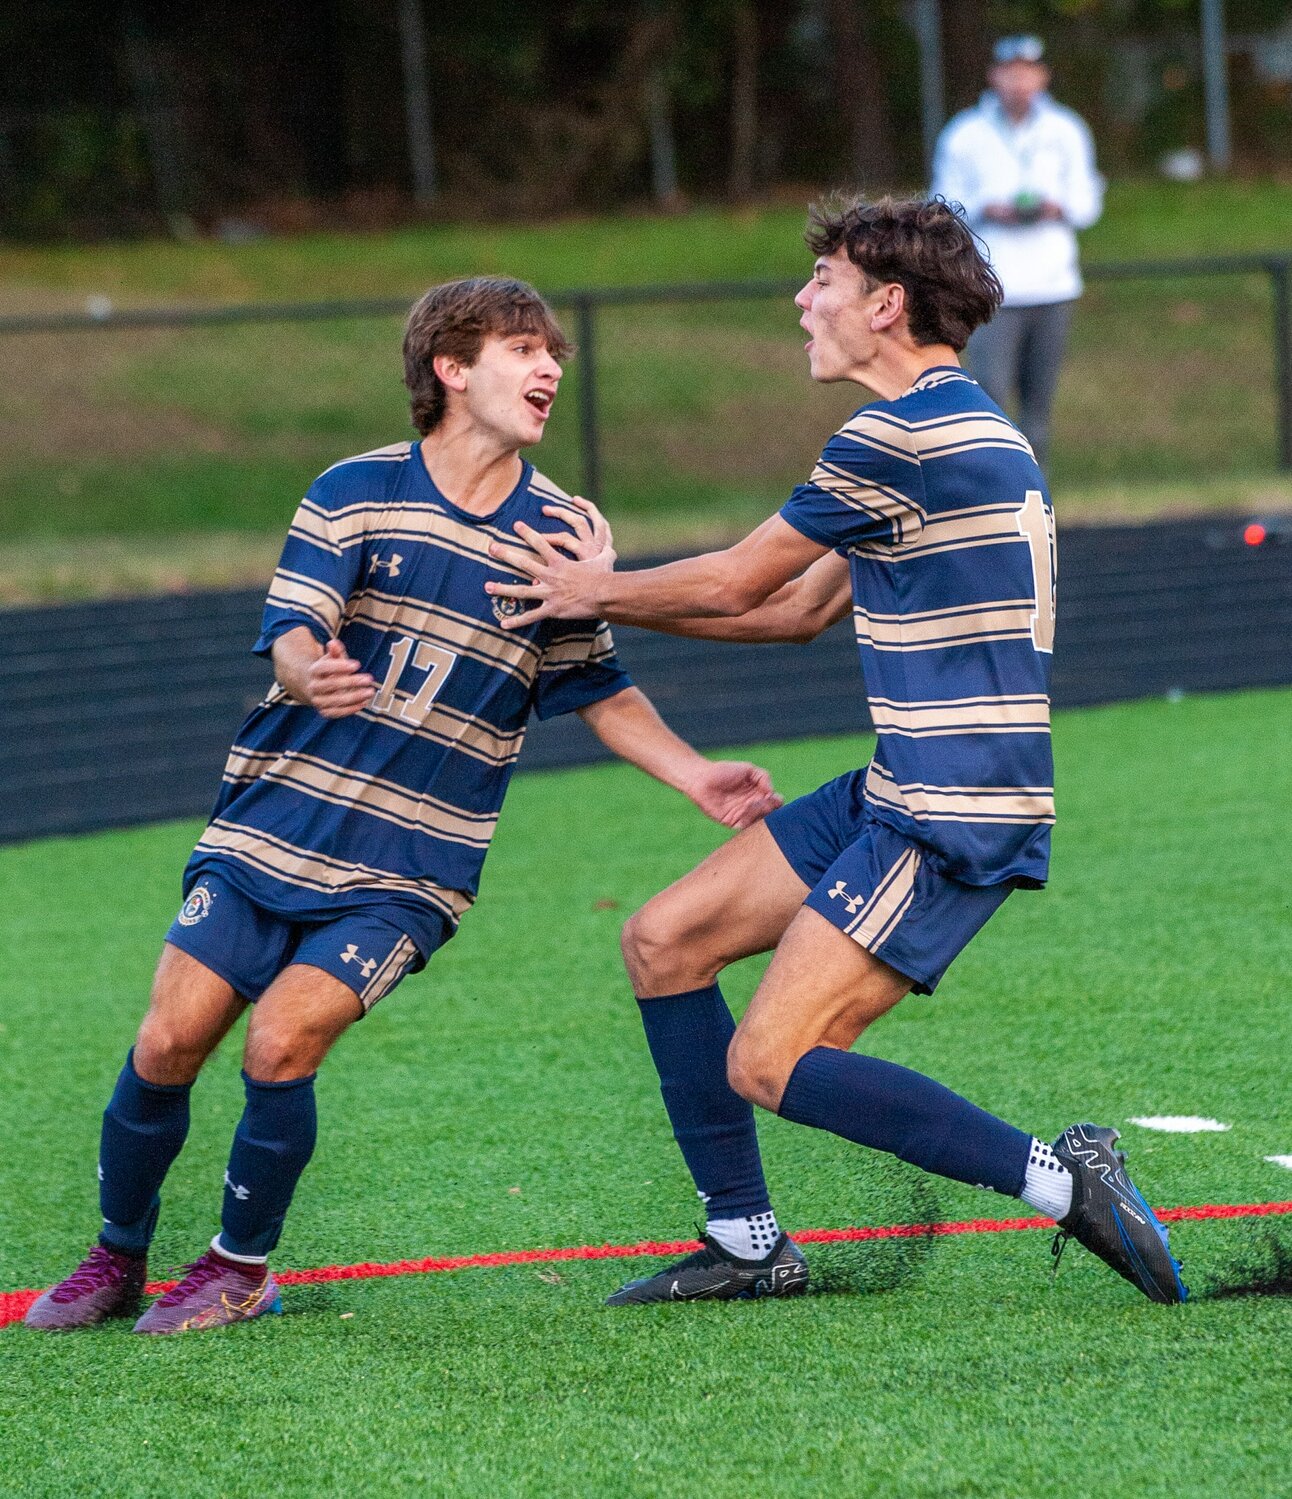 Andrew Campbell (left) and Tully Espinola celebrated Campbell's first goal of the game.